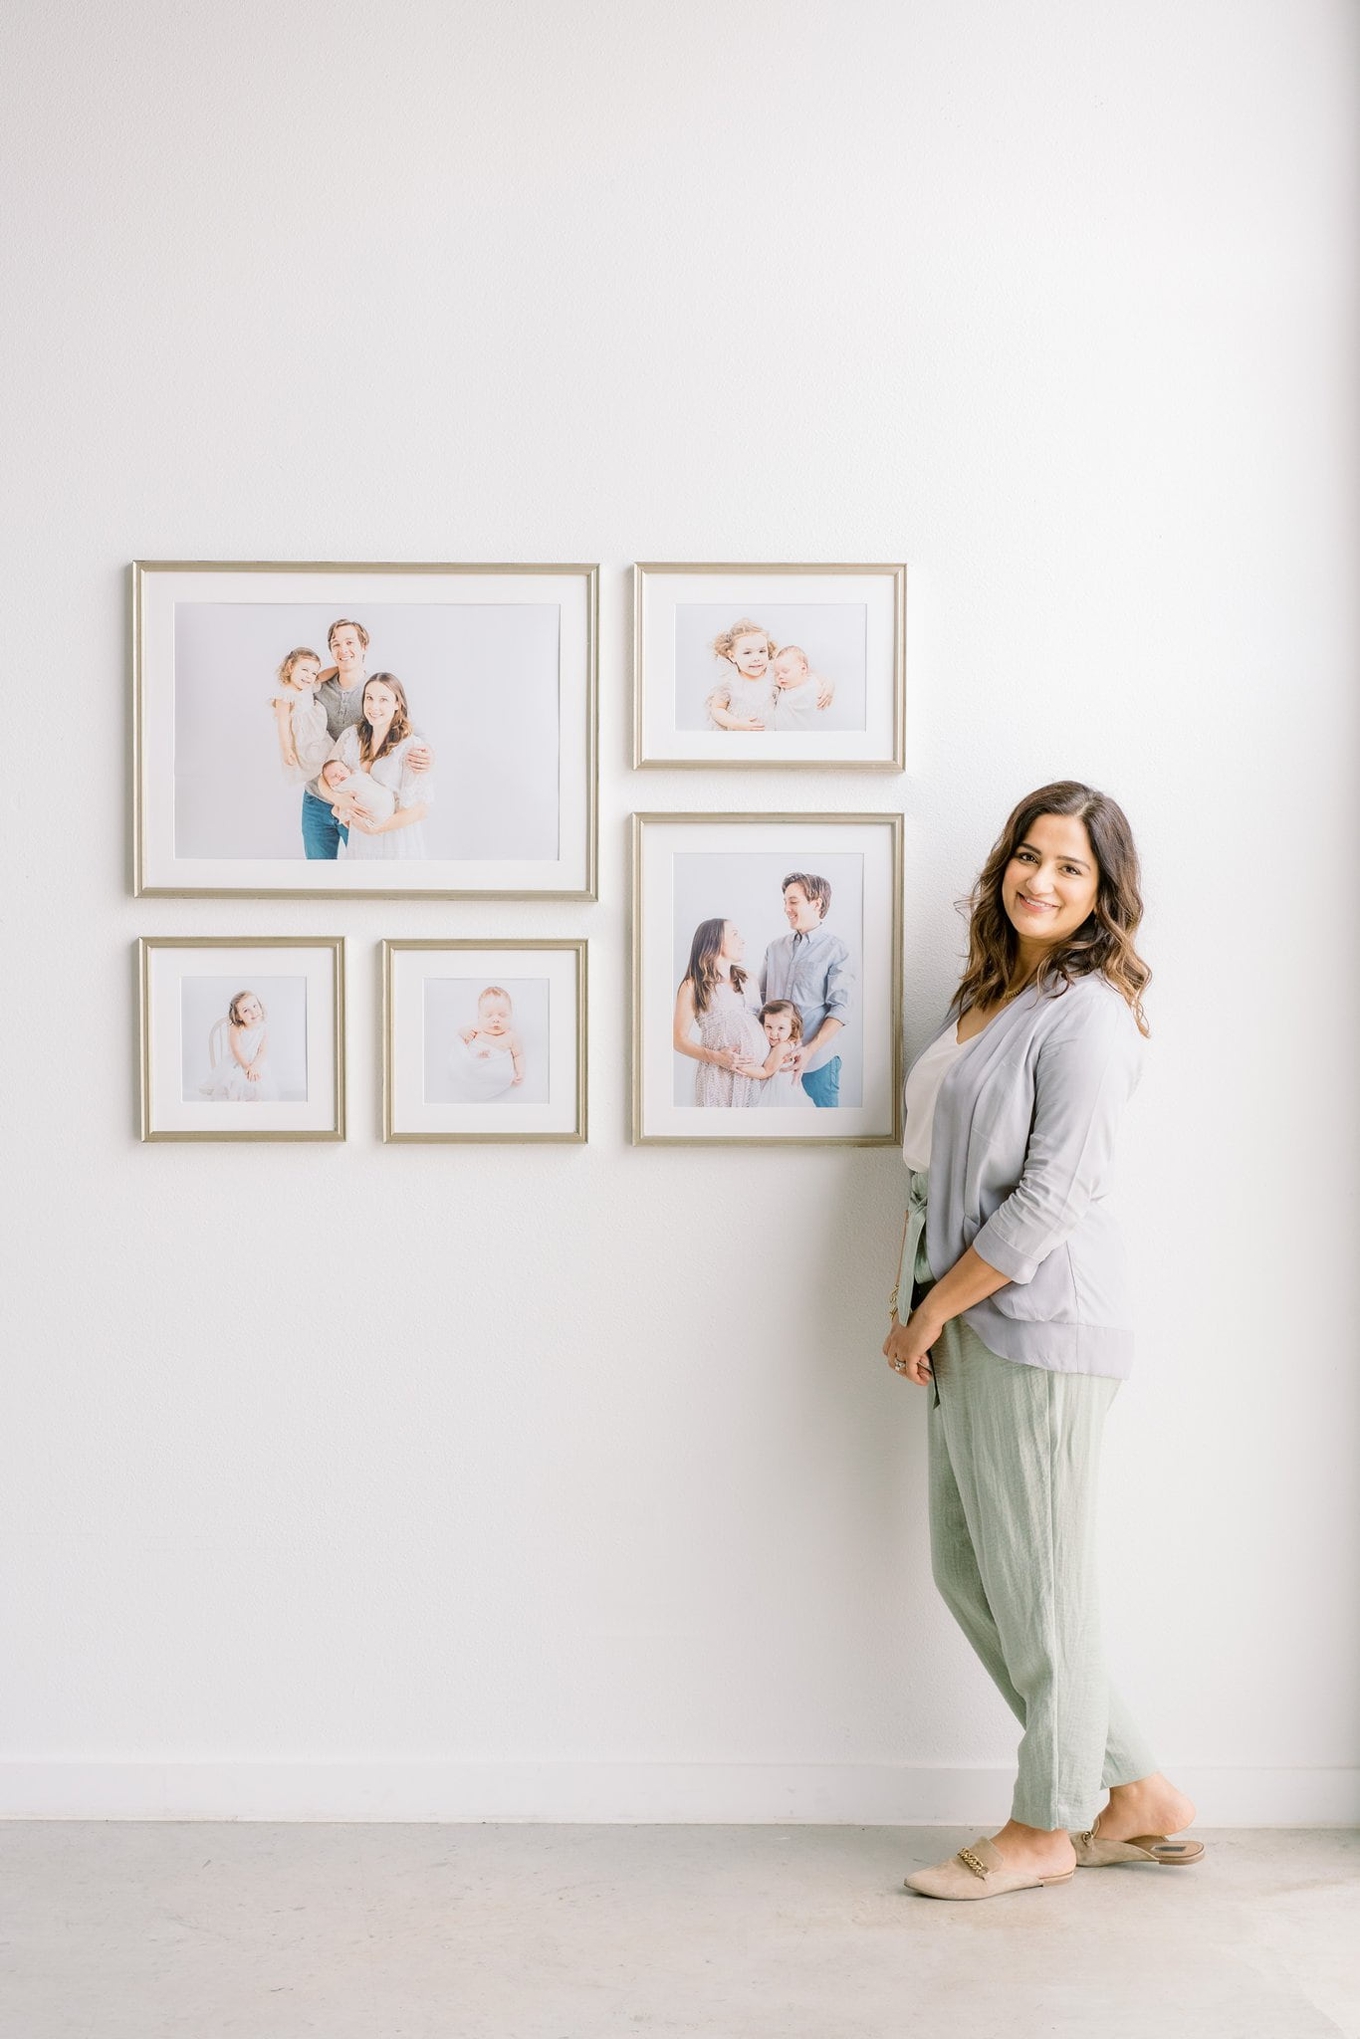 Beautiful custom-designed gallery wall with newborn and maternity images by Austin baby photographer, Sana Ahmed Photography.